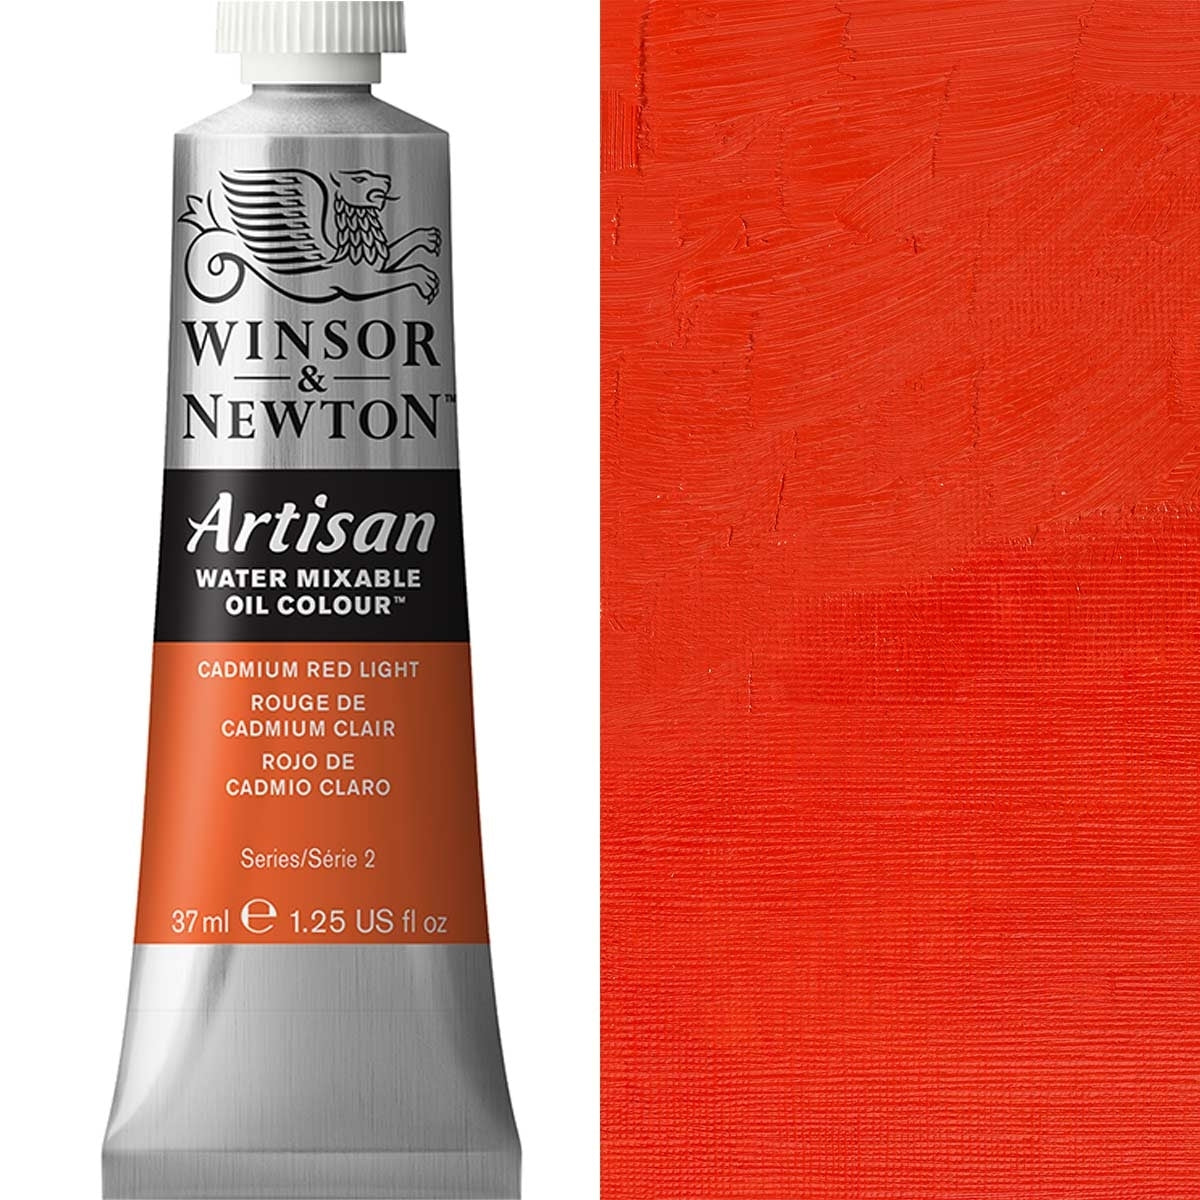 Winsor and Newton - Artisan Oil Colour Watermixable - 37ml - Cadmium Red Light